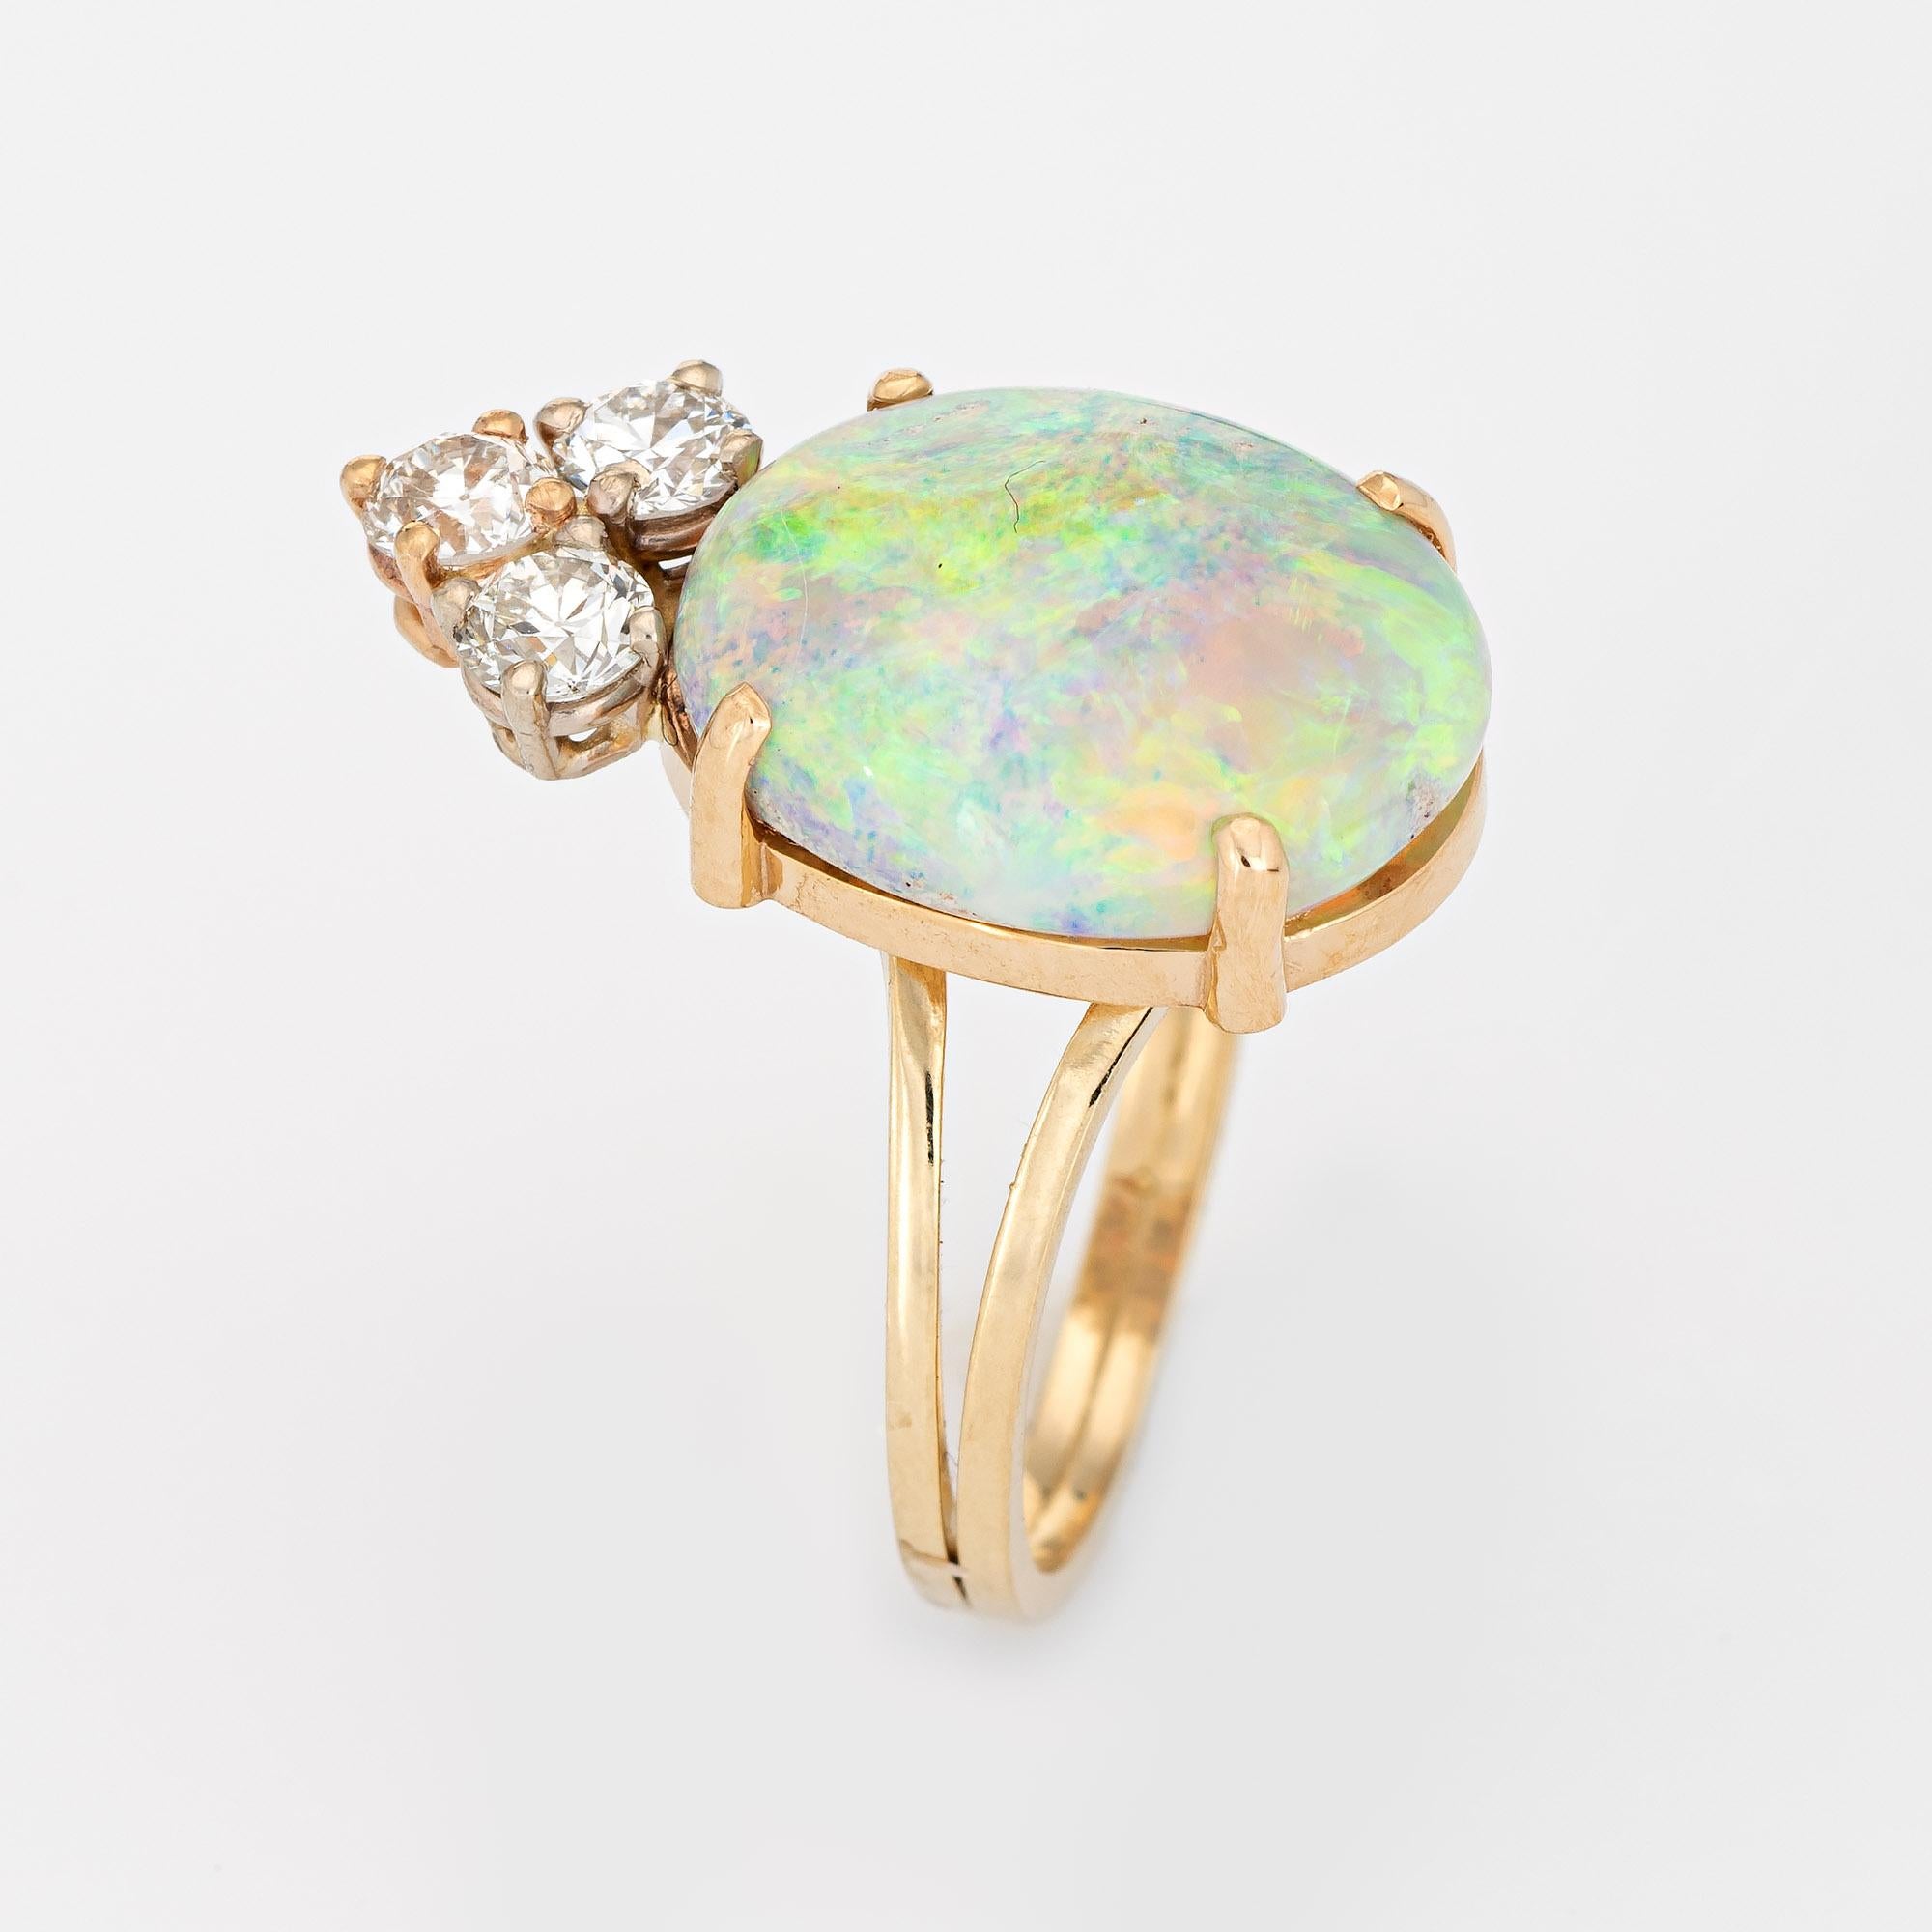 Stylish vintage opal & diamond cocktail ring crafted in 14 karat yellow gold. 

The natural opal measures 15mm x 11mm (estimated at 6.50 carats), accented with three estimated 0.15 carat round brilliant cut diamond. The total diamond weight is